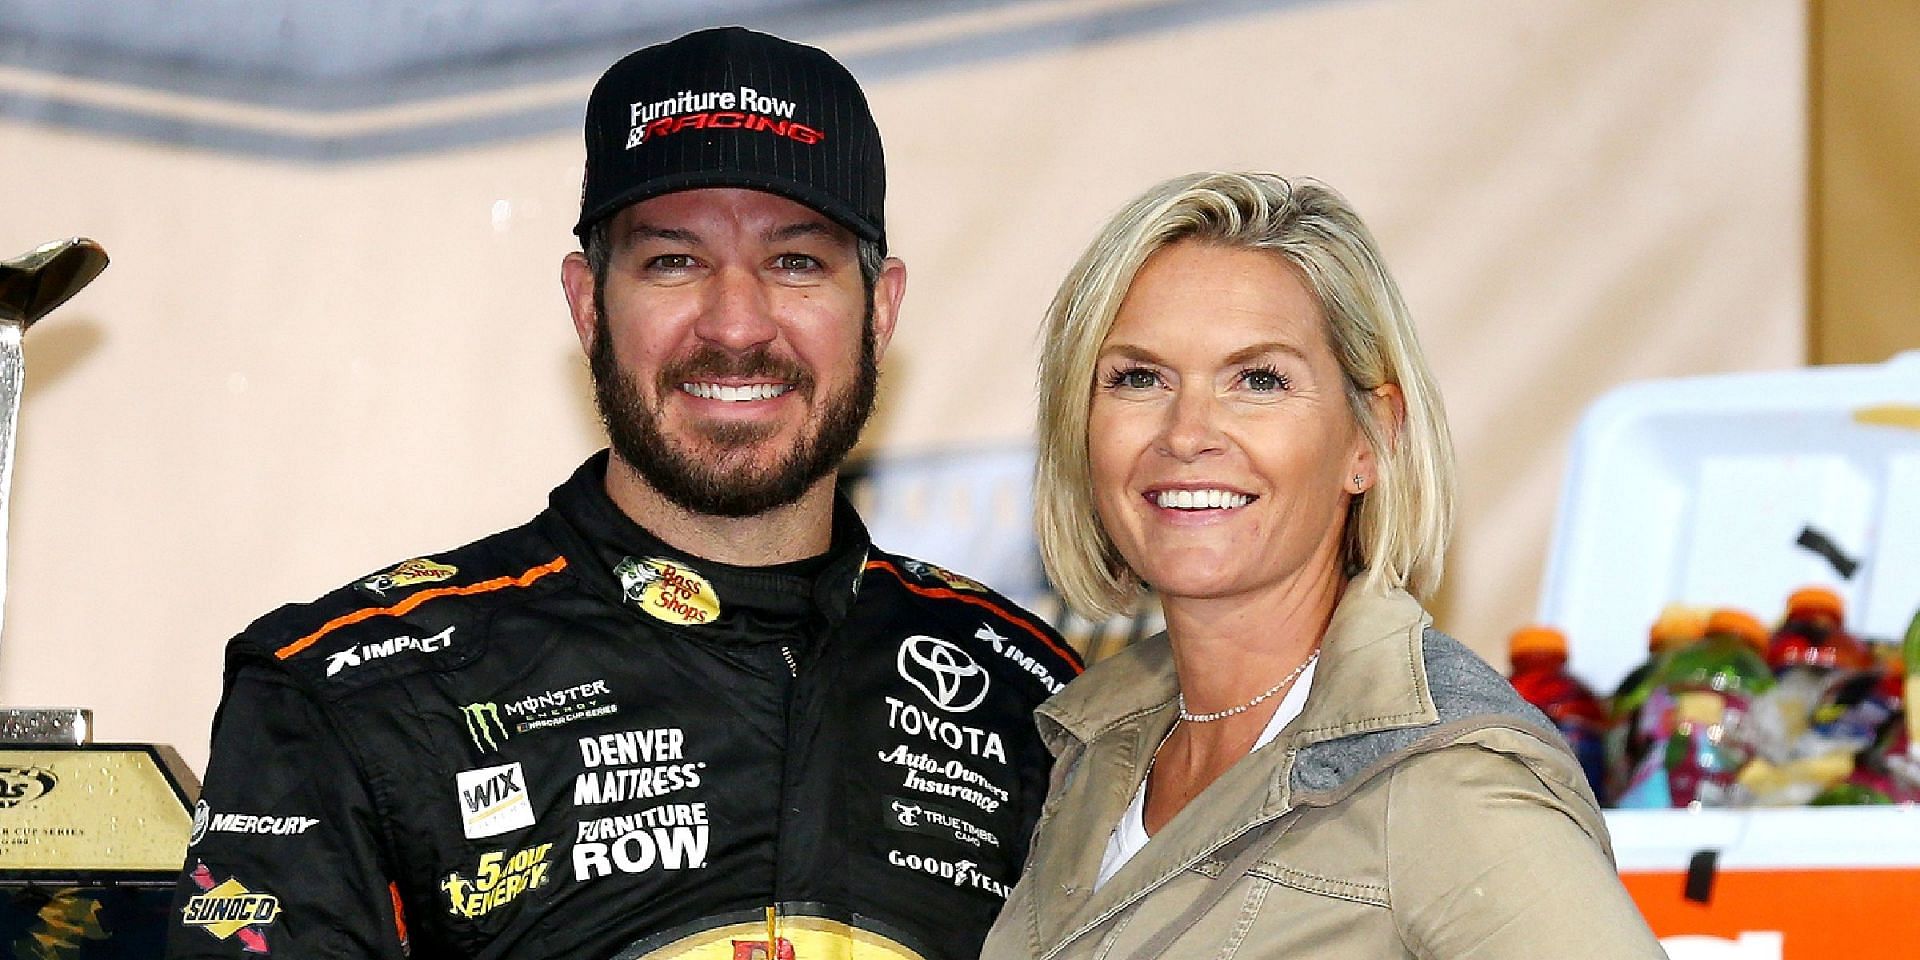 (L-R) NASCAR Cup Series driver Martin Truex Jr. and former girlfriend Sherry Pollex. Picture Credits: Getty Images